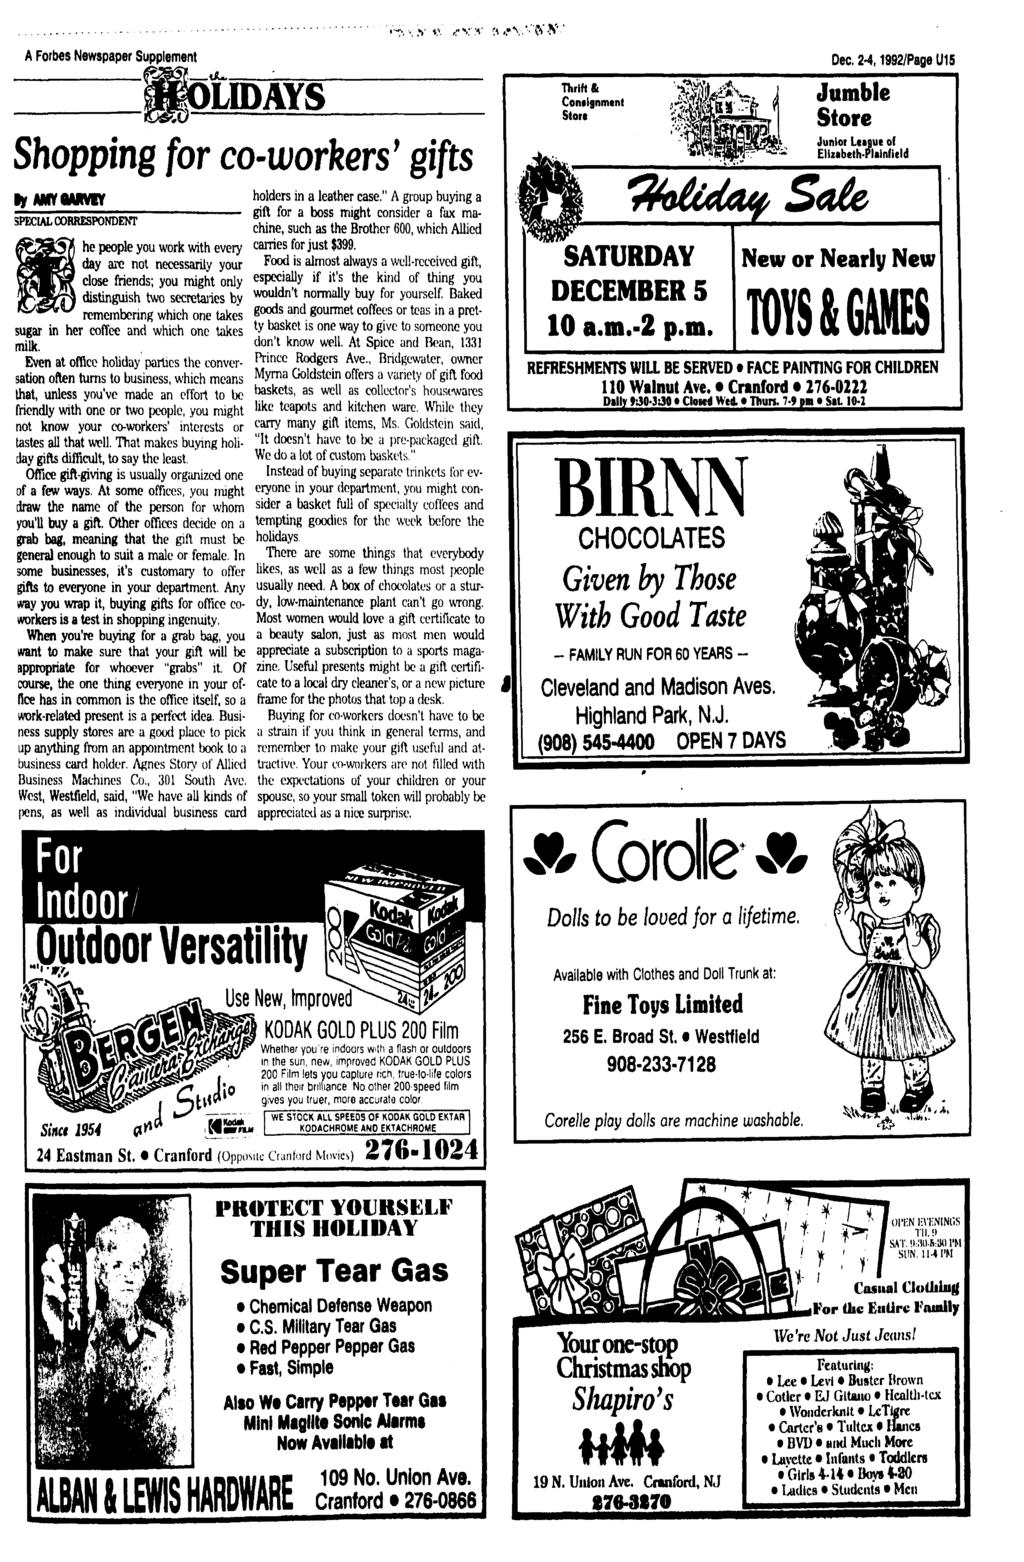 ^ \.v A Forbes Newspaper Supplement LIDAYS Shopping for co-workers' gifts Thrift & Consignment Store Dec, 2-4,1992/Page U15 Jumble Store Junior League of Eltzabeth-Plilnfield holders in a leather